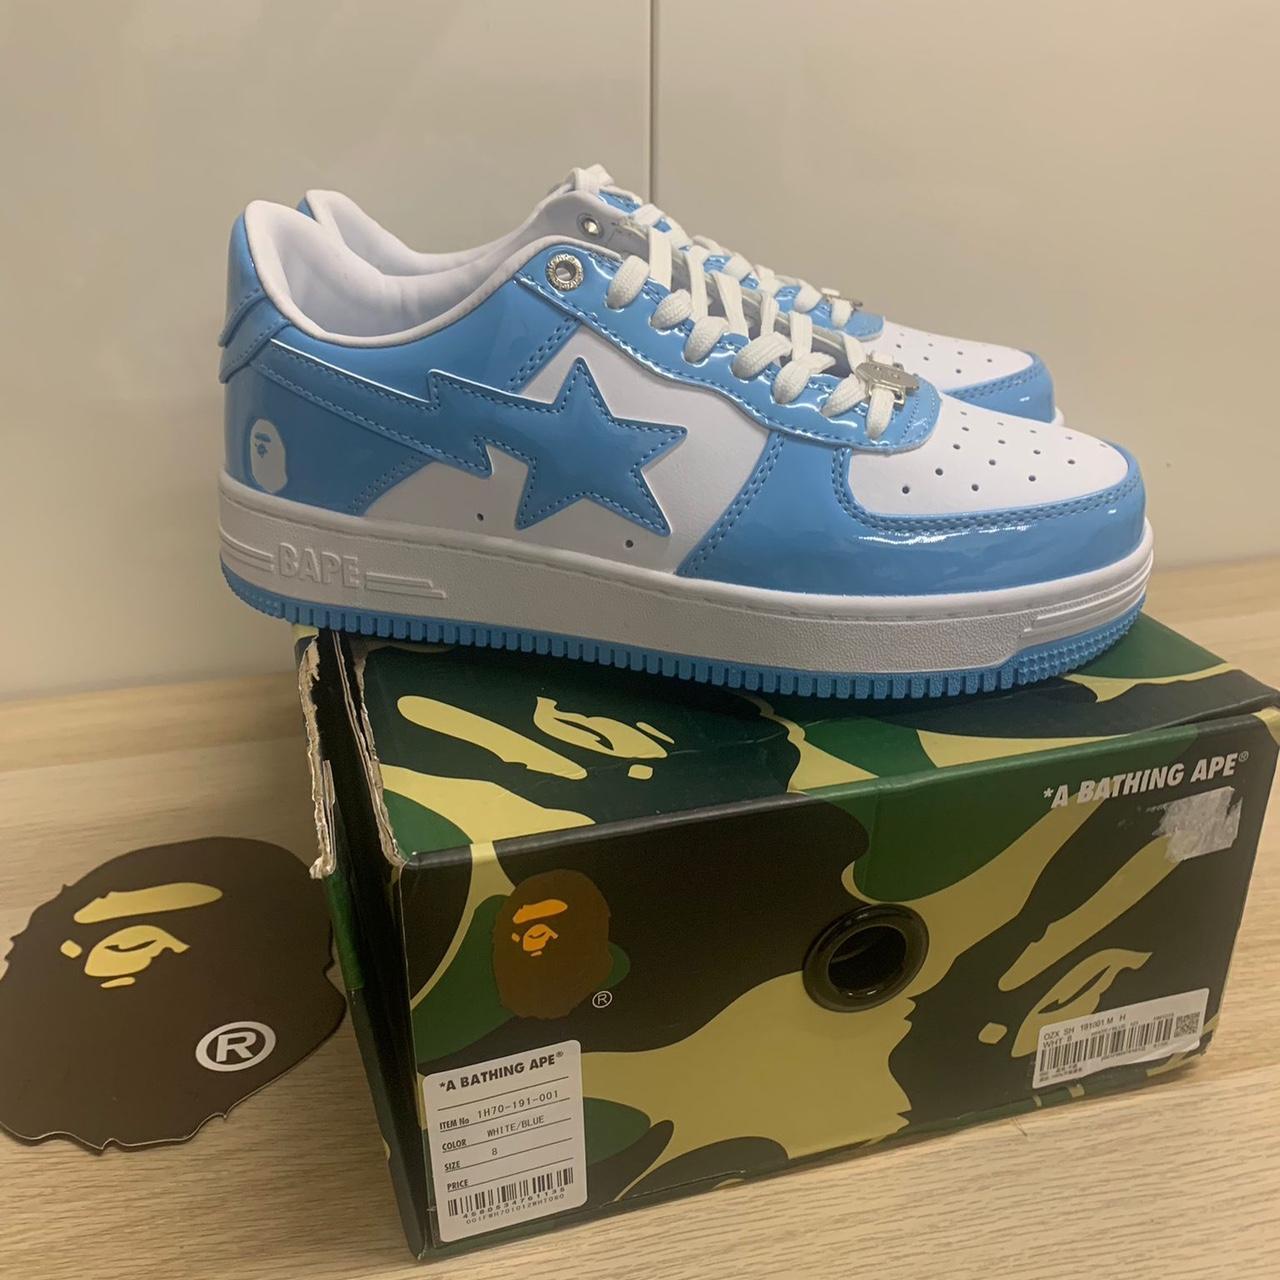 Bapesta Baby Blue White Low Trainers Size 7 UK A... - Depop